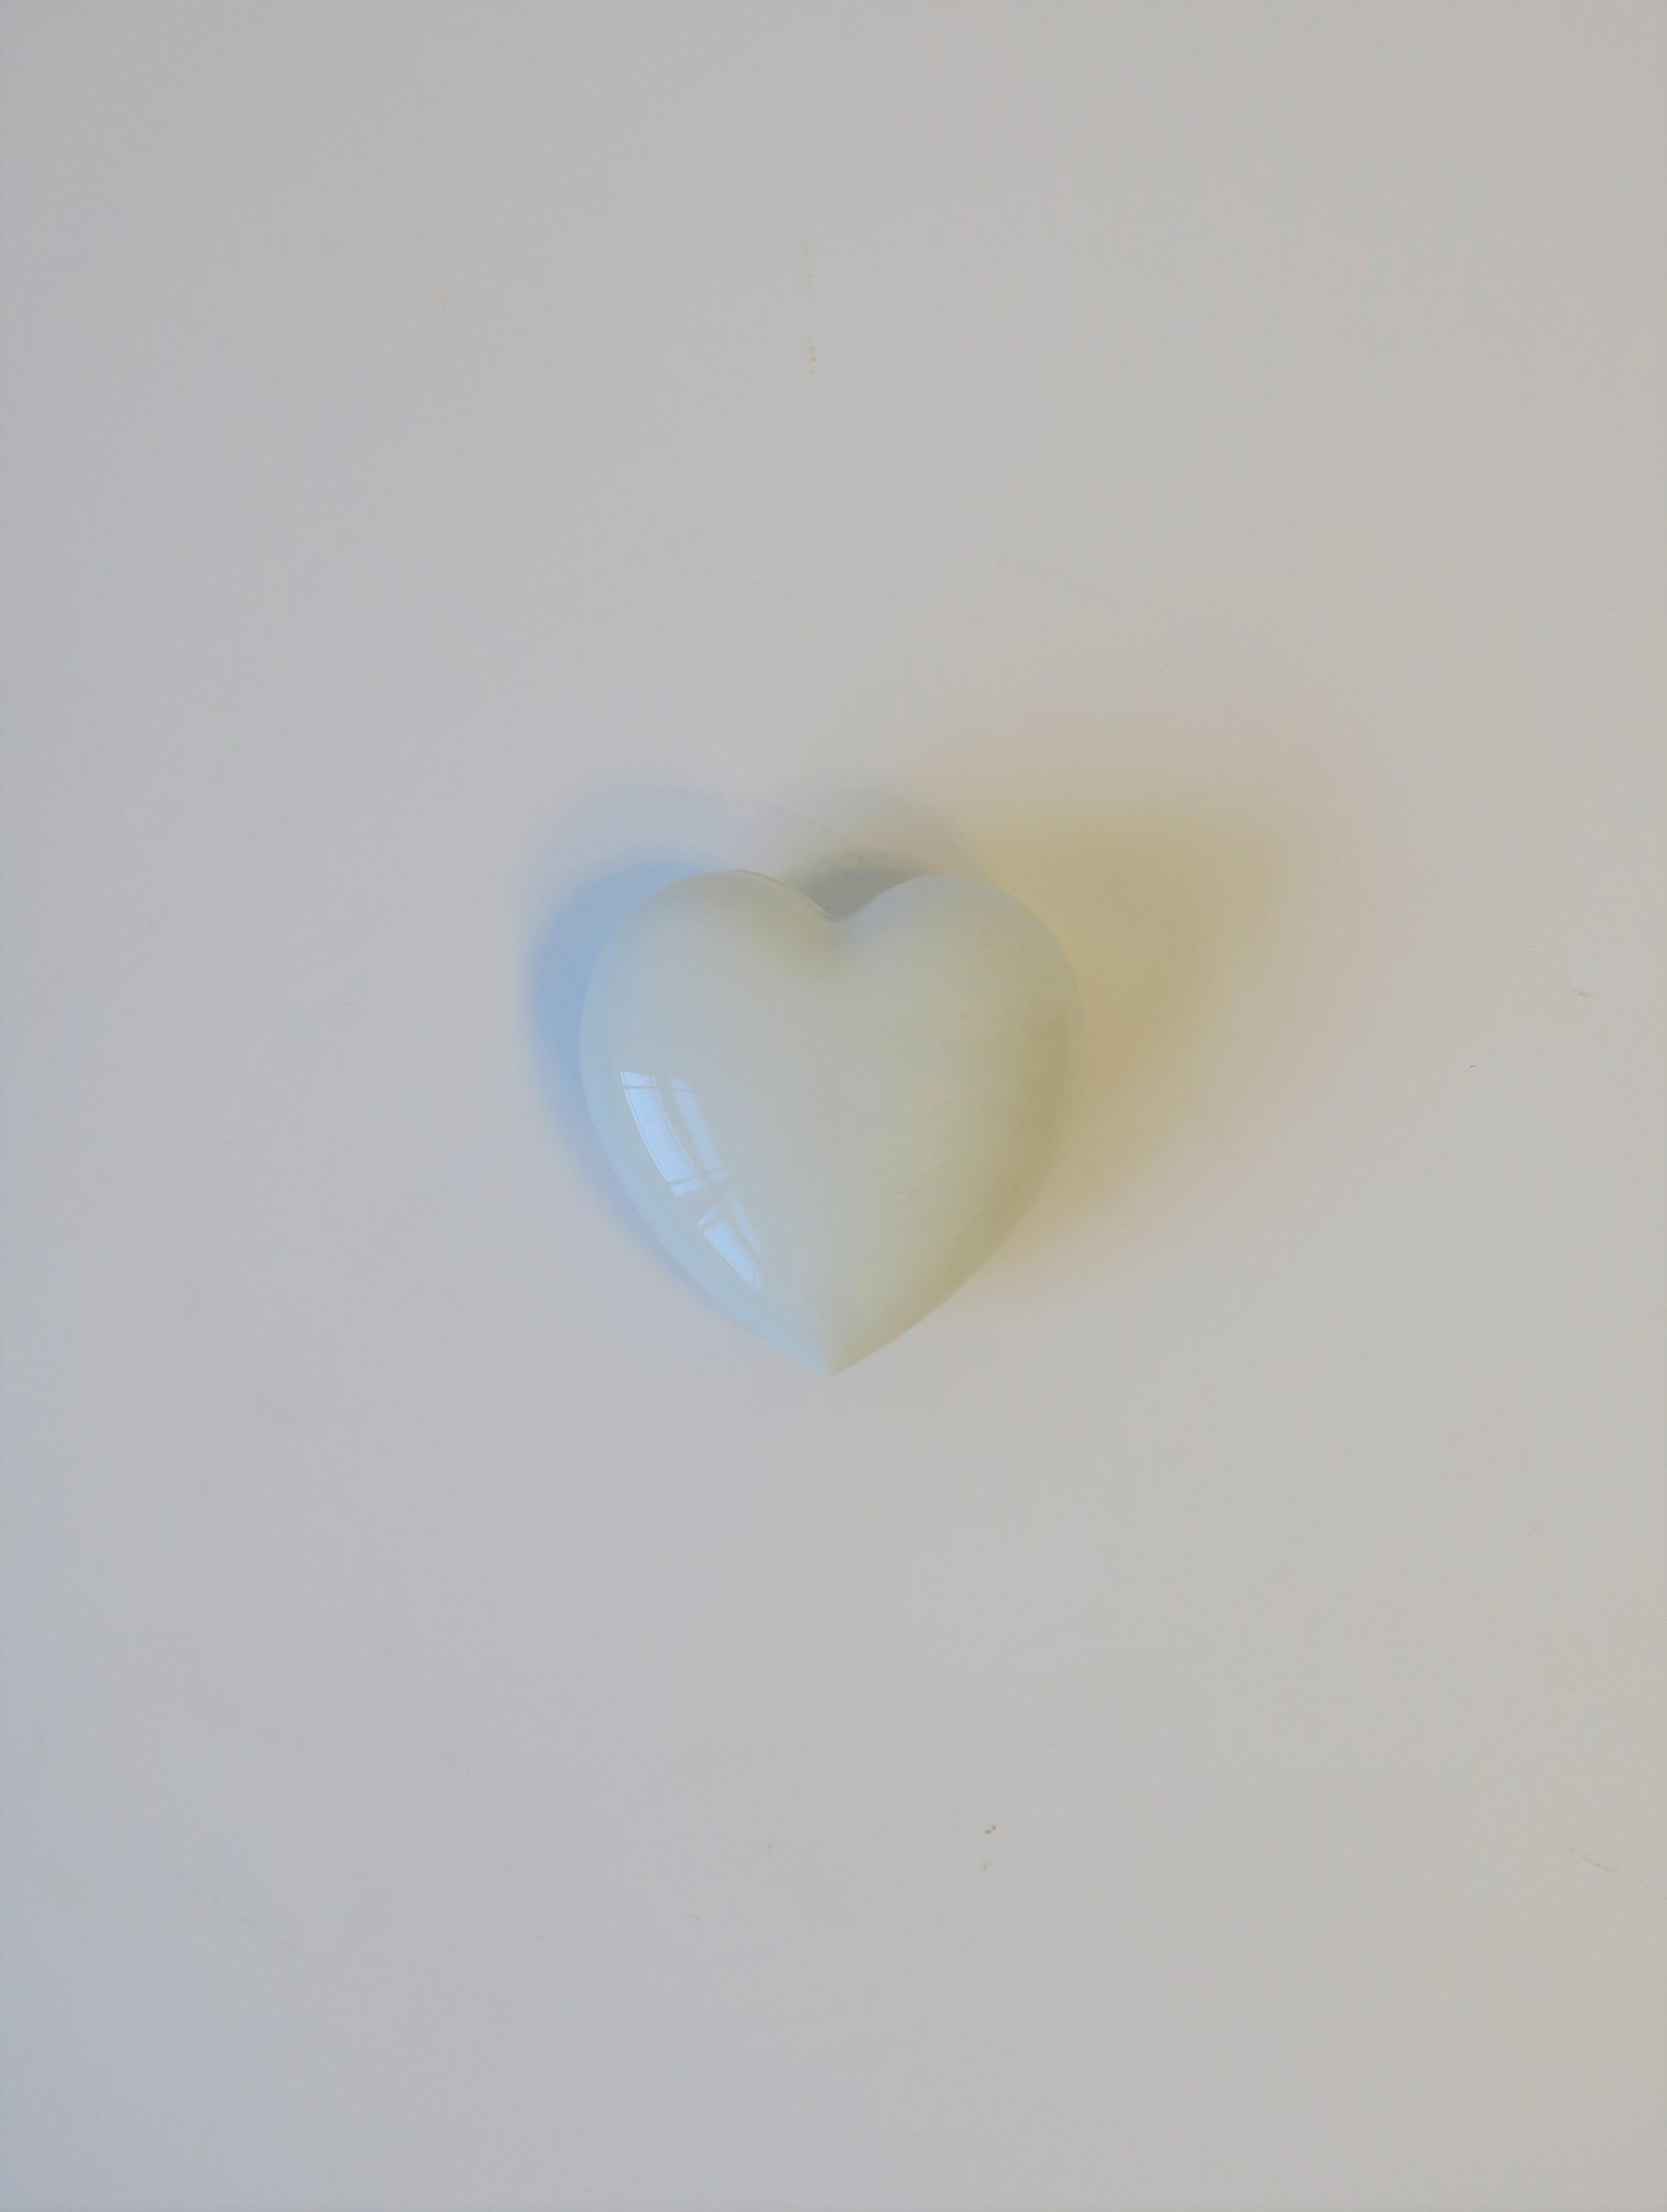 A French white porcelain heart jewelry box. Marked on bottom, 'France', Limoges'. Box is great for a vanity, nightstand, desk, etc. 

Piece measures: 1.75